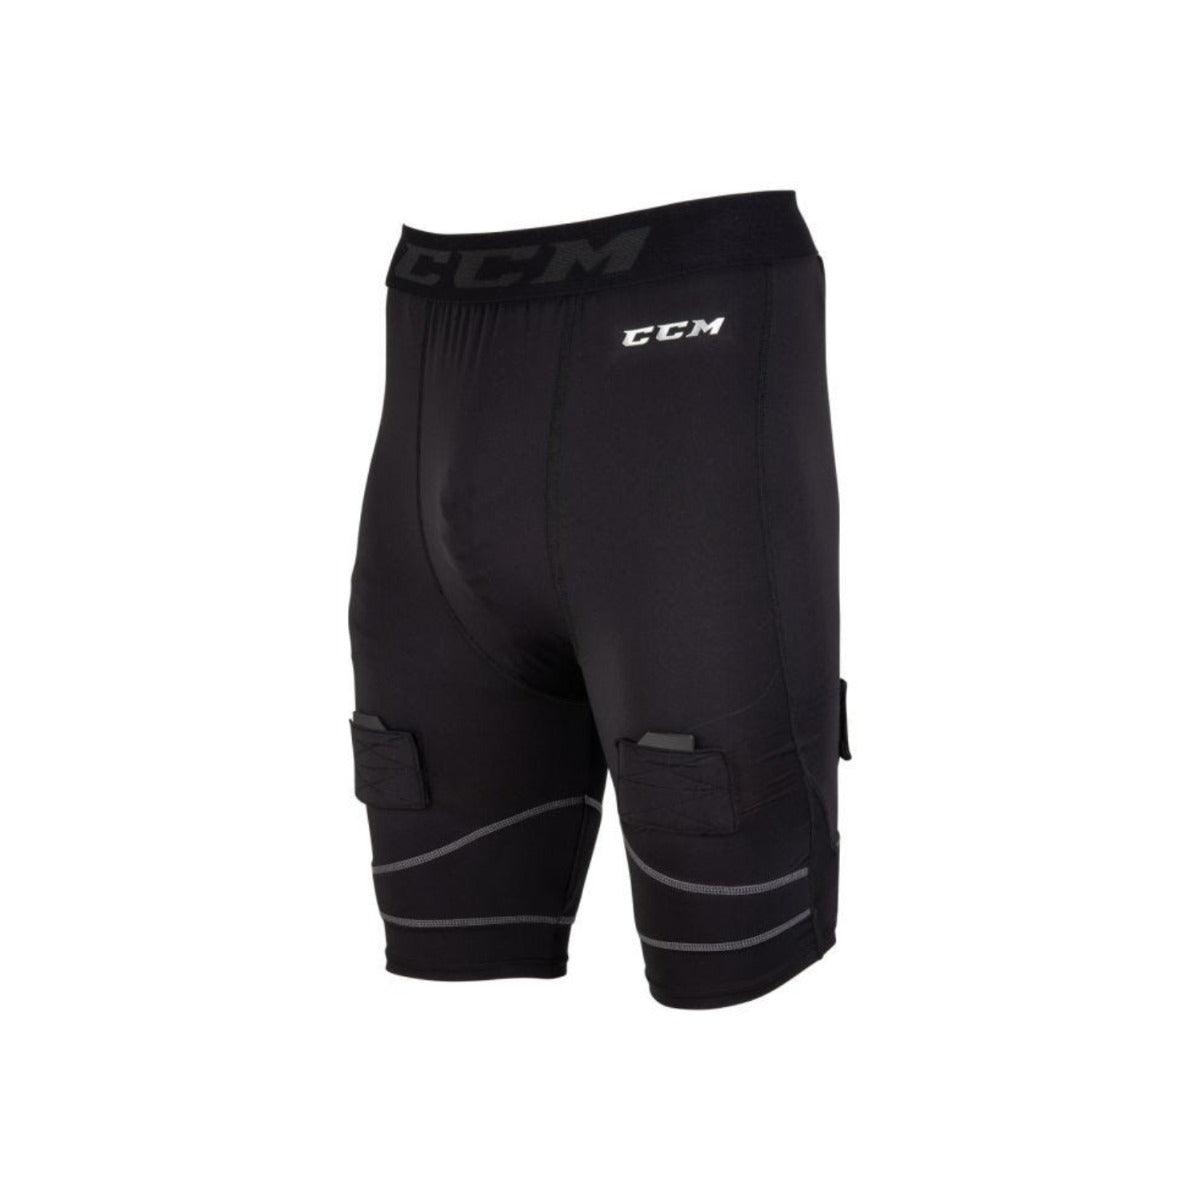 Men Compression Pro Short with Jock/Tabs - Sports Excellence